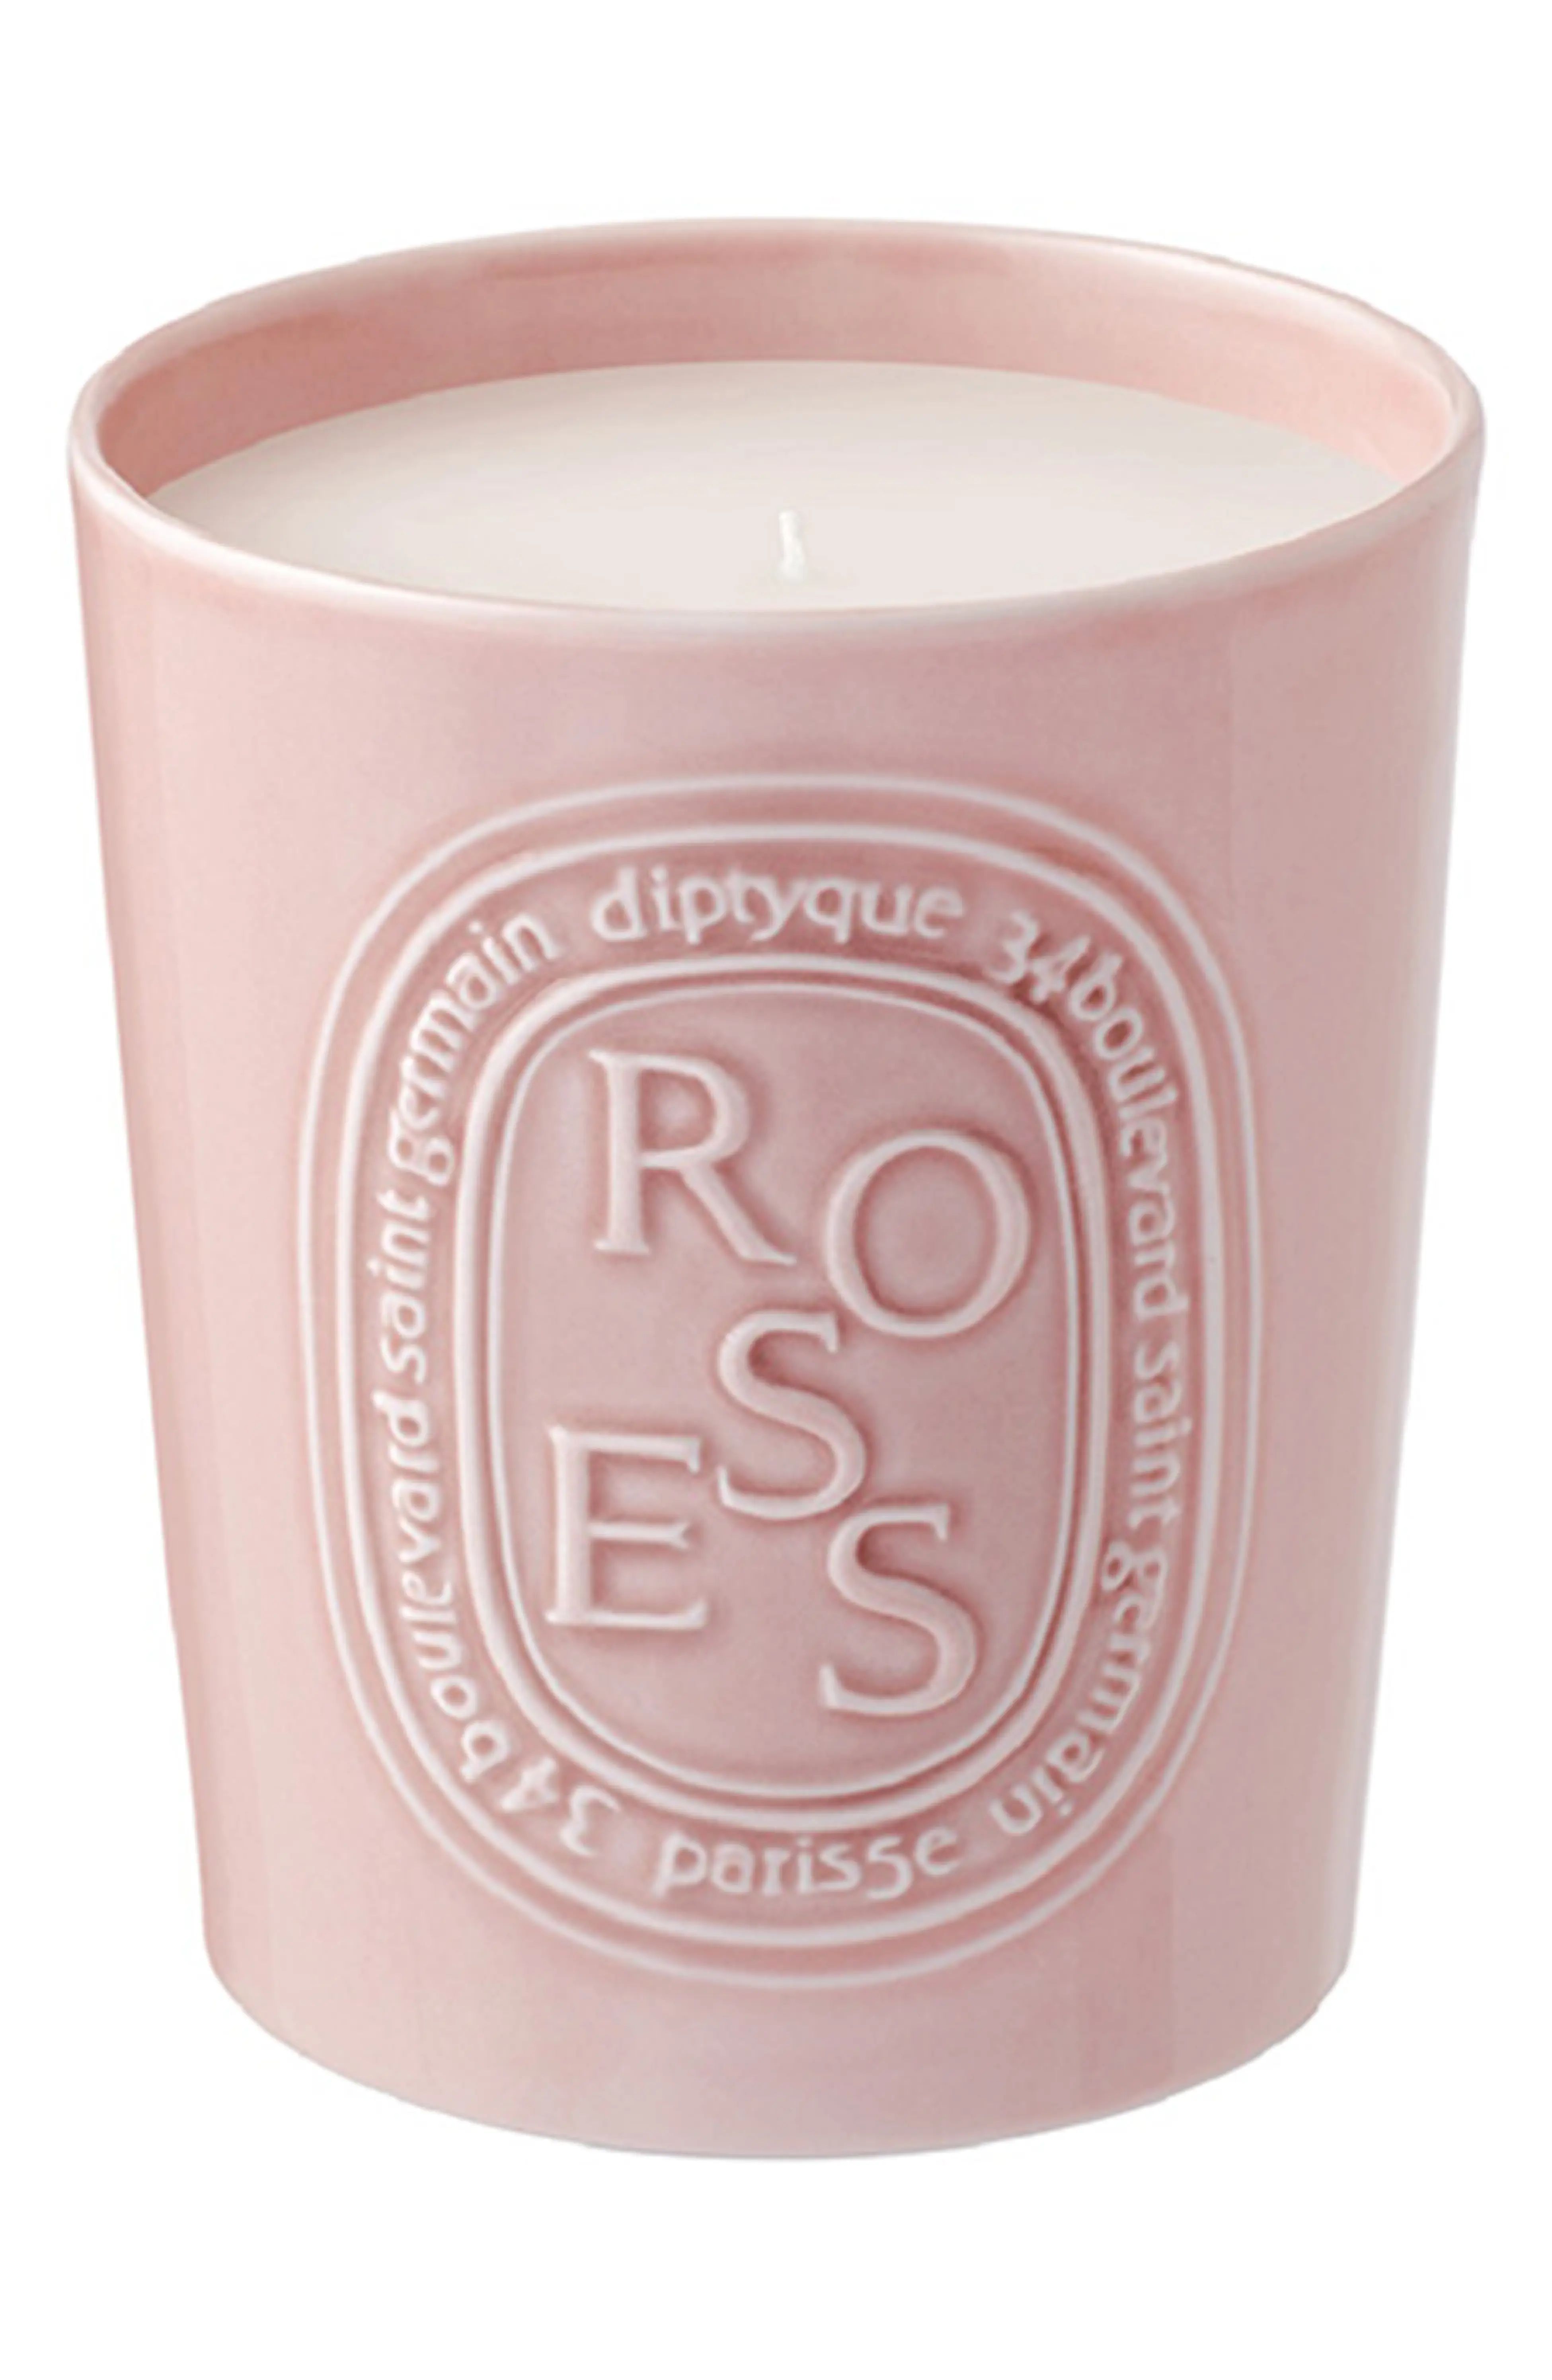 Diptyque Roses Large Scented Candle | Nordstrom | Nordstrom